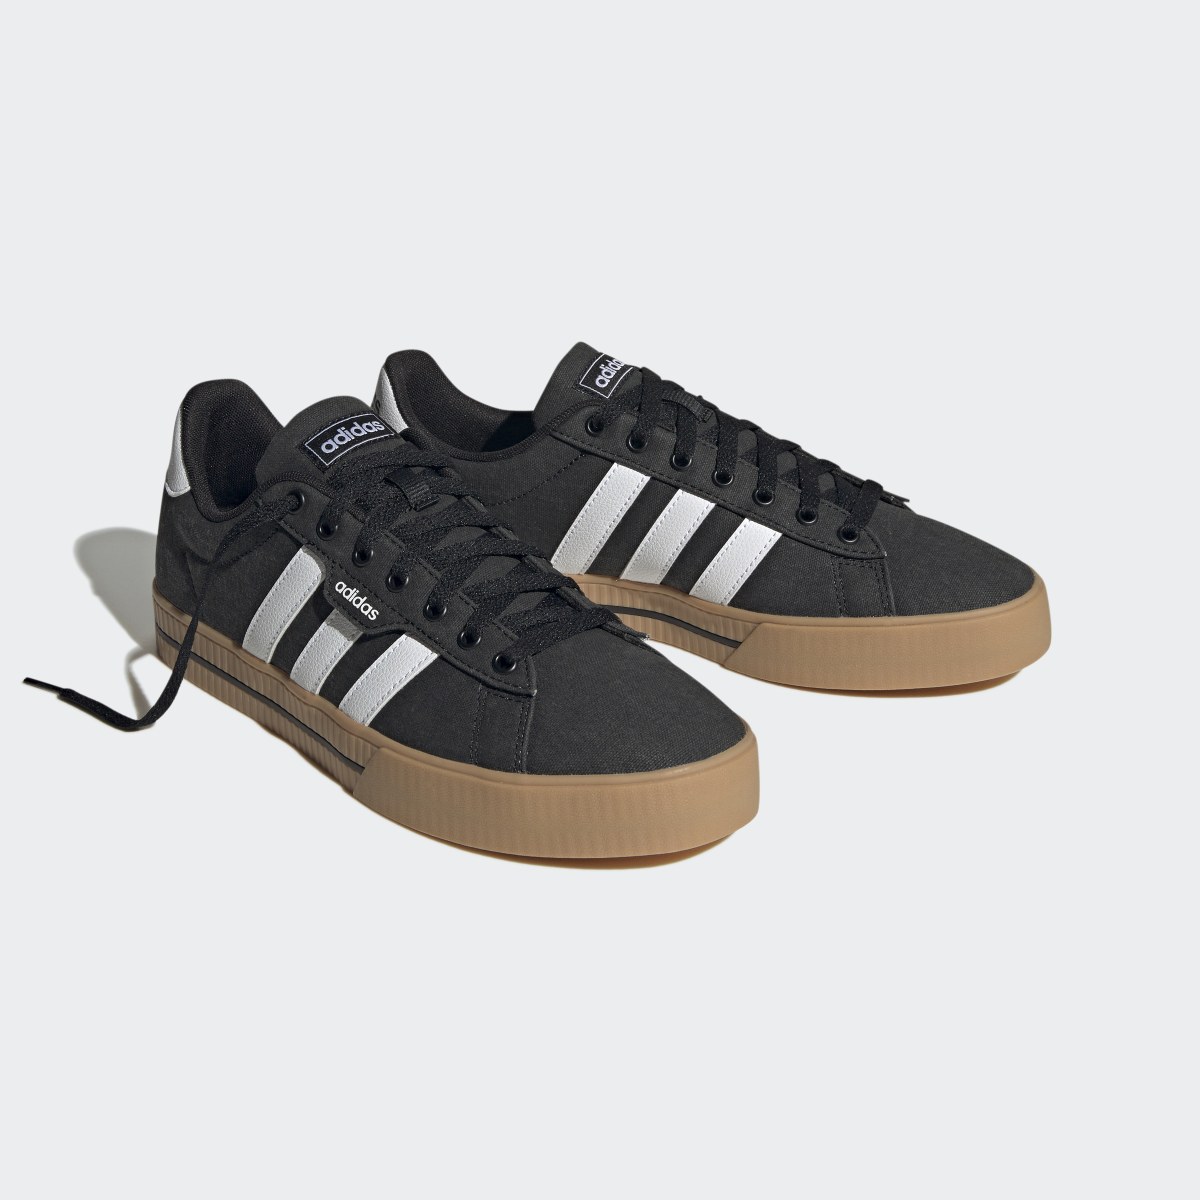 Adidas Daily 3.0 Shoes. 5